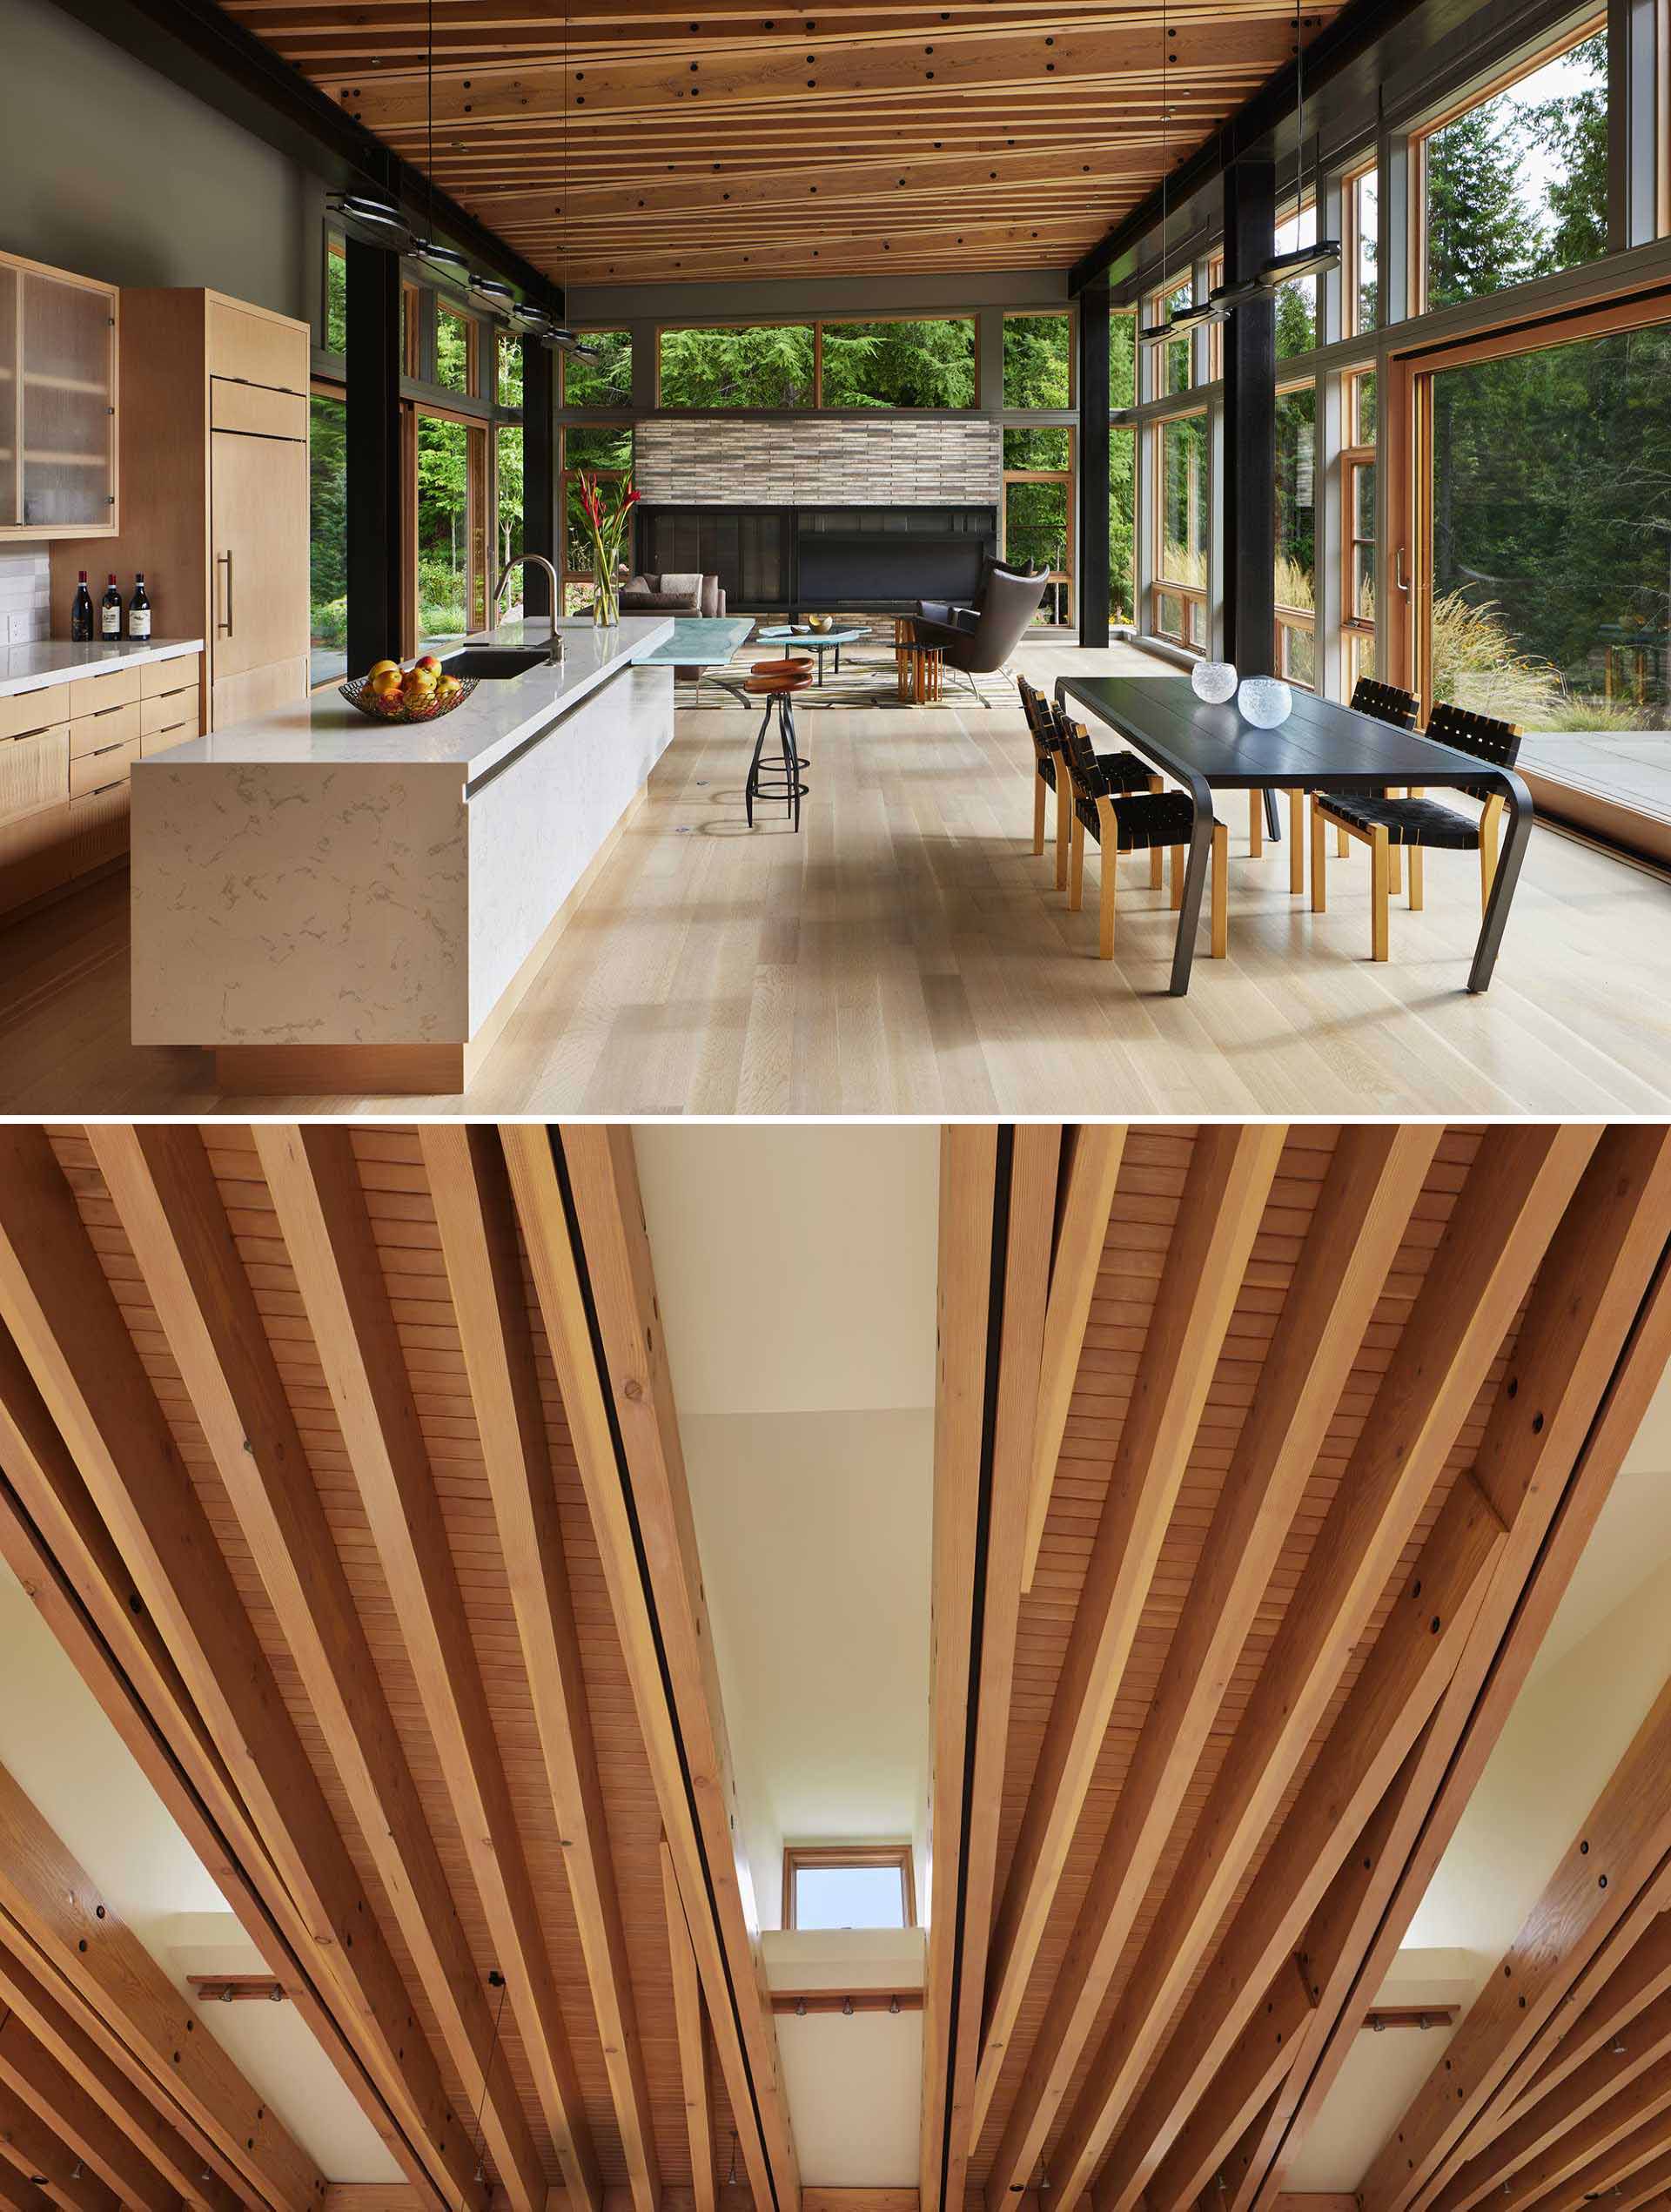 Inside, the living pavilion ceiling has a dense pattern of exposed wood beams, interrupted by five shafts of light coming from roof light monitors. Each light monitor is rotated slightly from the orthogonal geometry of the wood beams, so there is a sense of movement across the wood ceiling.